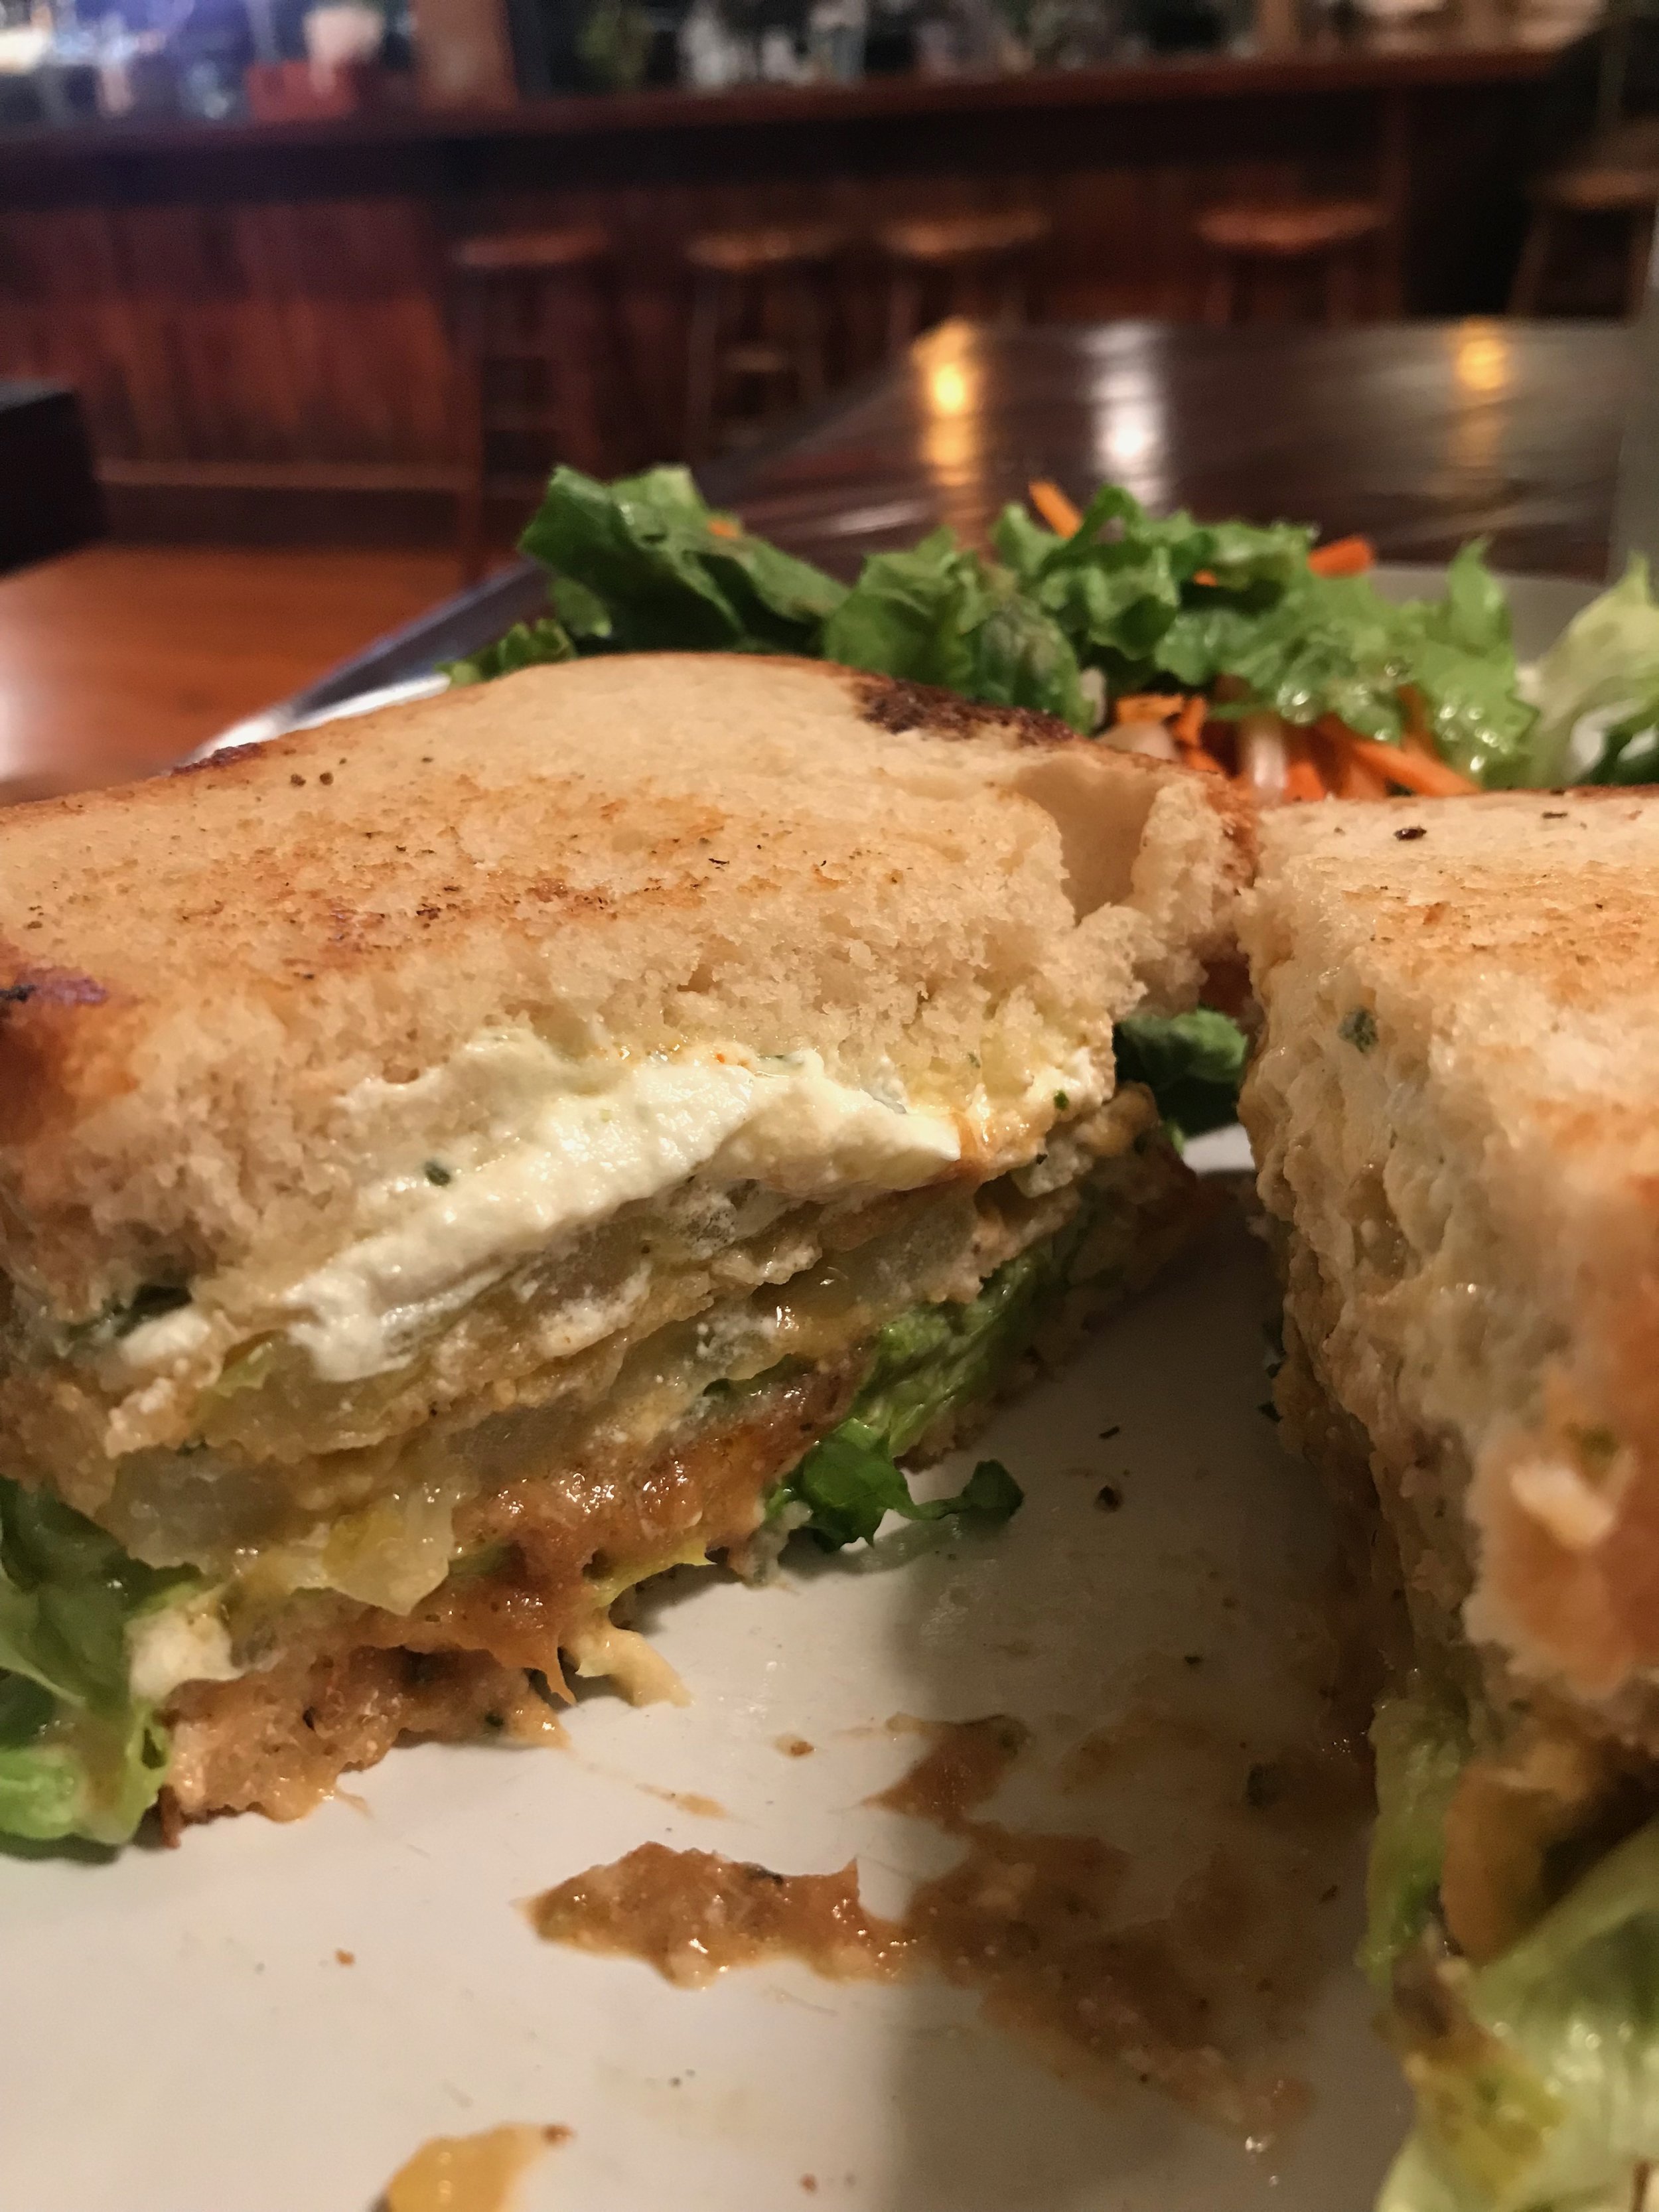 Fried Green Tomato Sandwich - The Floridian. St Augustine, FL